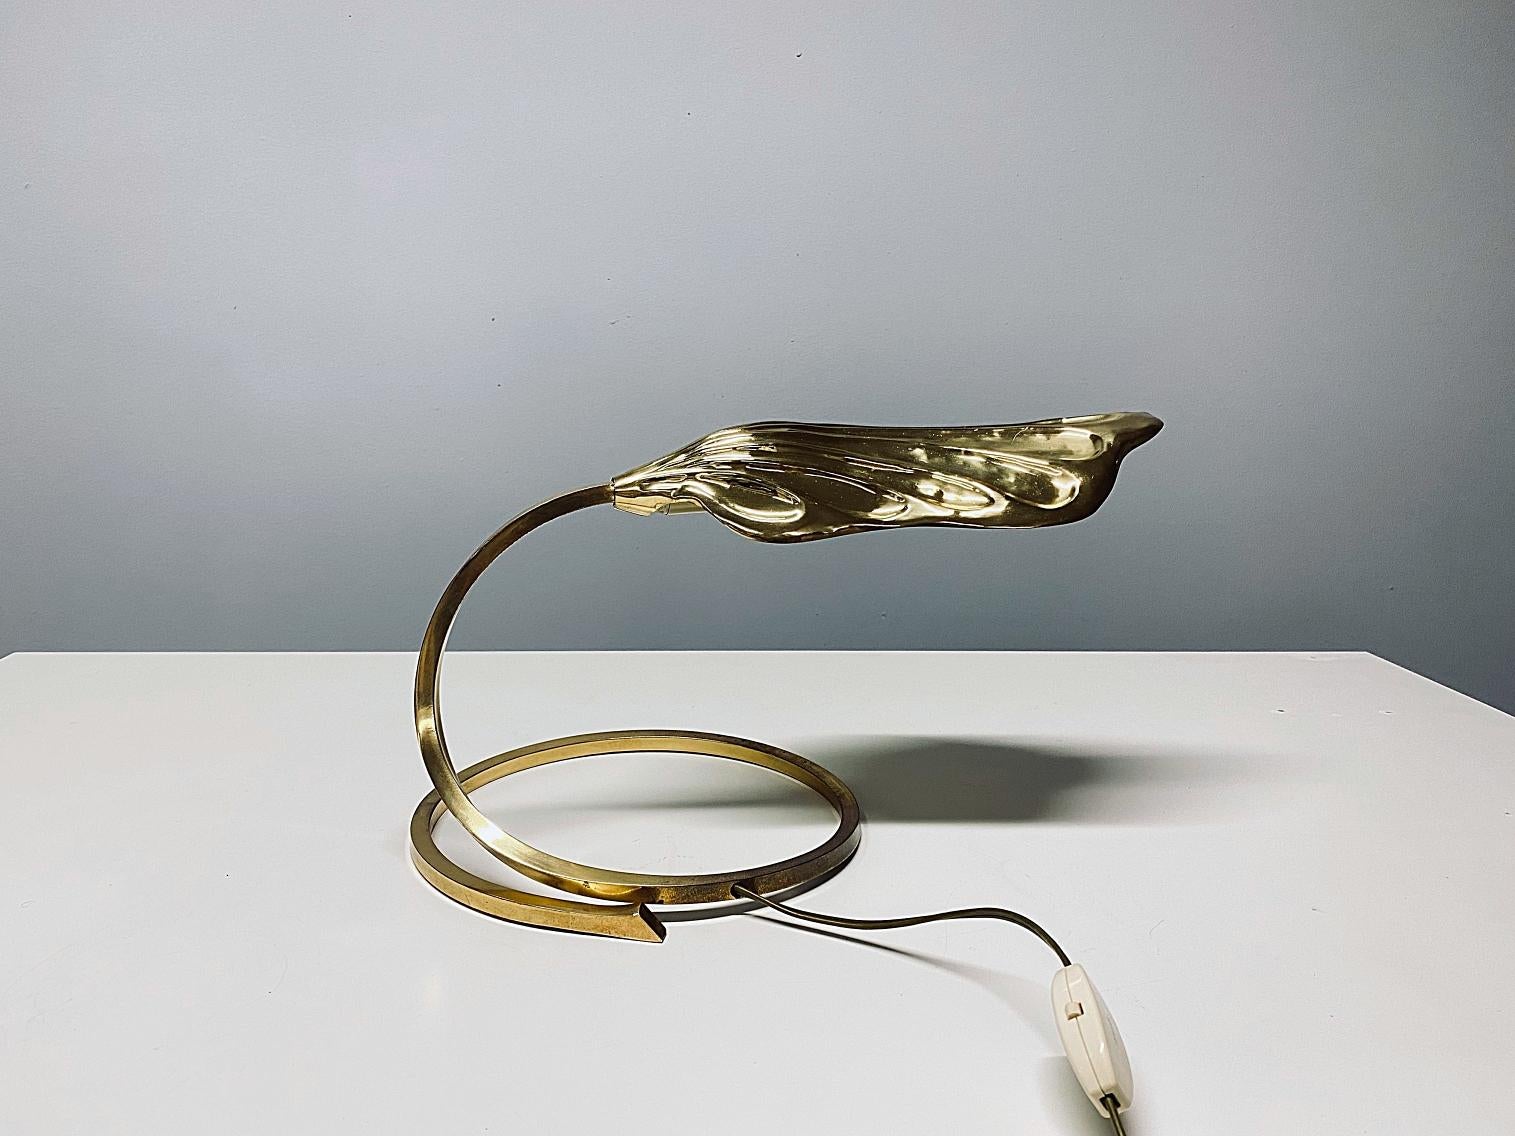 Beautiful table lamp designed by Tommaso Barbi for Bottega Gadda manufactured in 1970s, Italy. The lamp is made of polished brass. The lamp provides a smooth and wonderful light. The lamp is in a very good original condition, fully working and